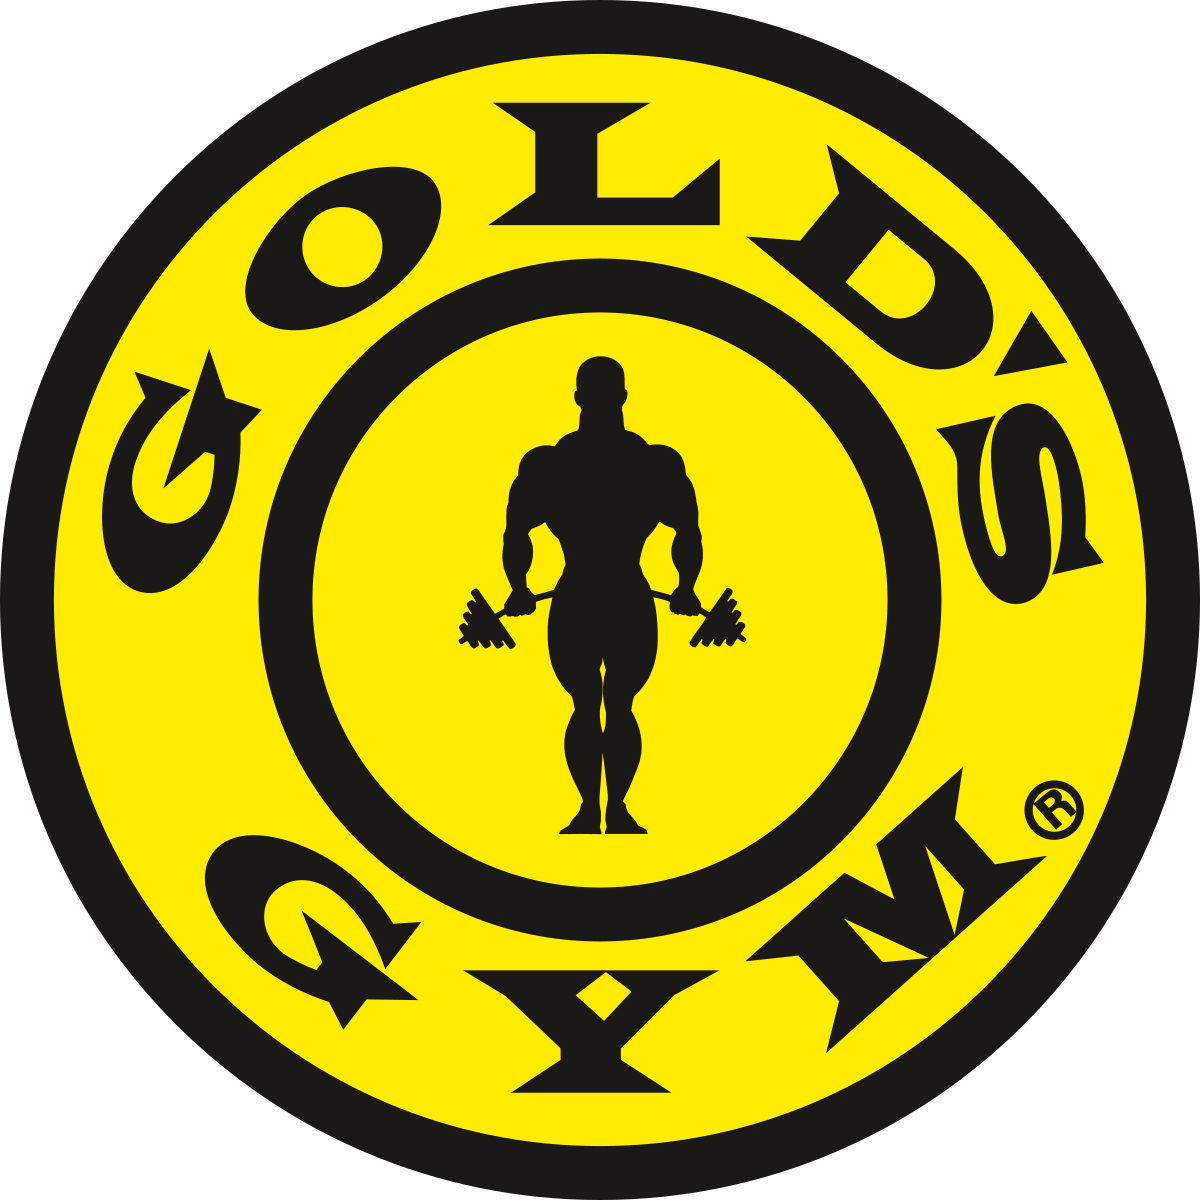 Gold S Gym Home Gym Exercise Chart Pdf